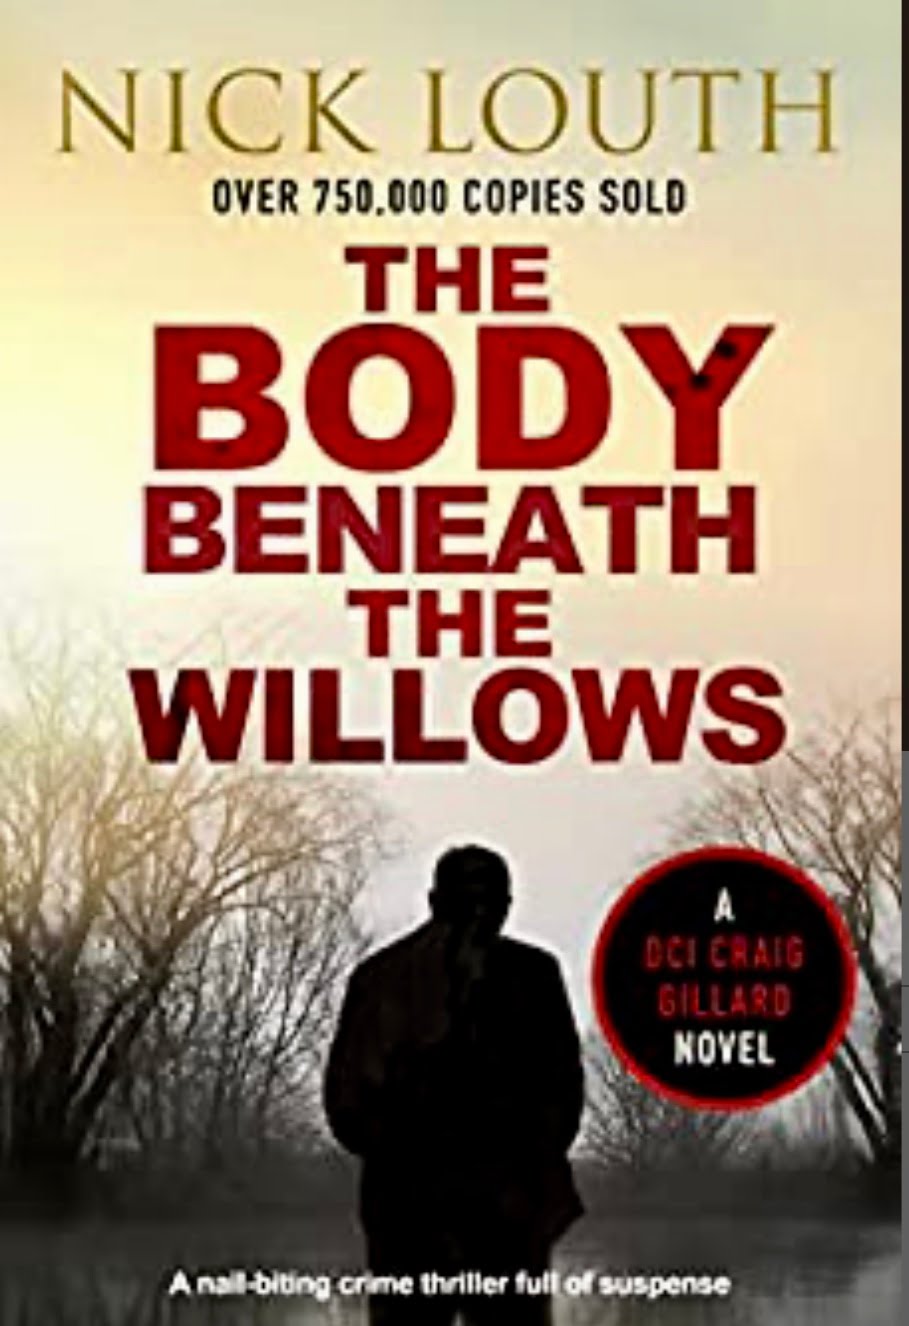 THE BODY BENEATH THE WILLOWS BY NICK LOUTH – BOOK REVIEW